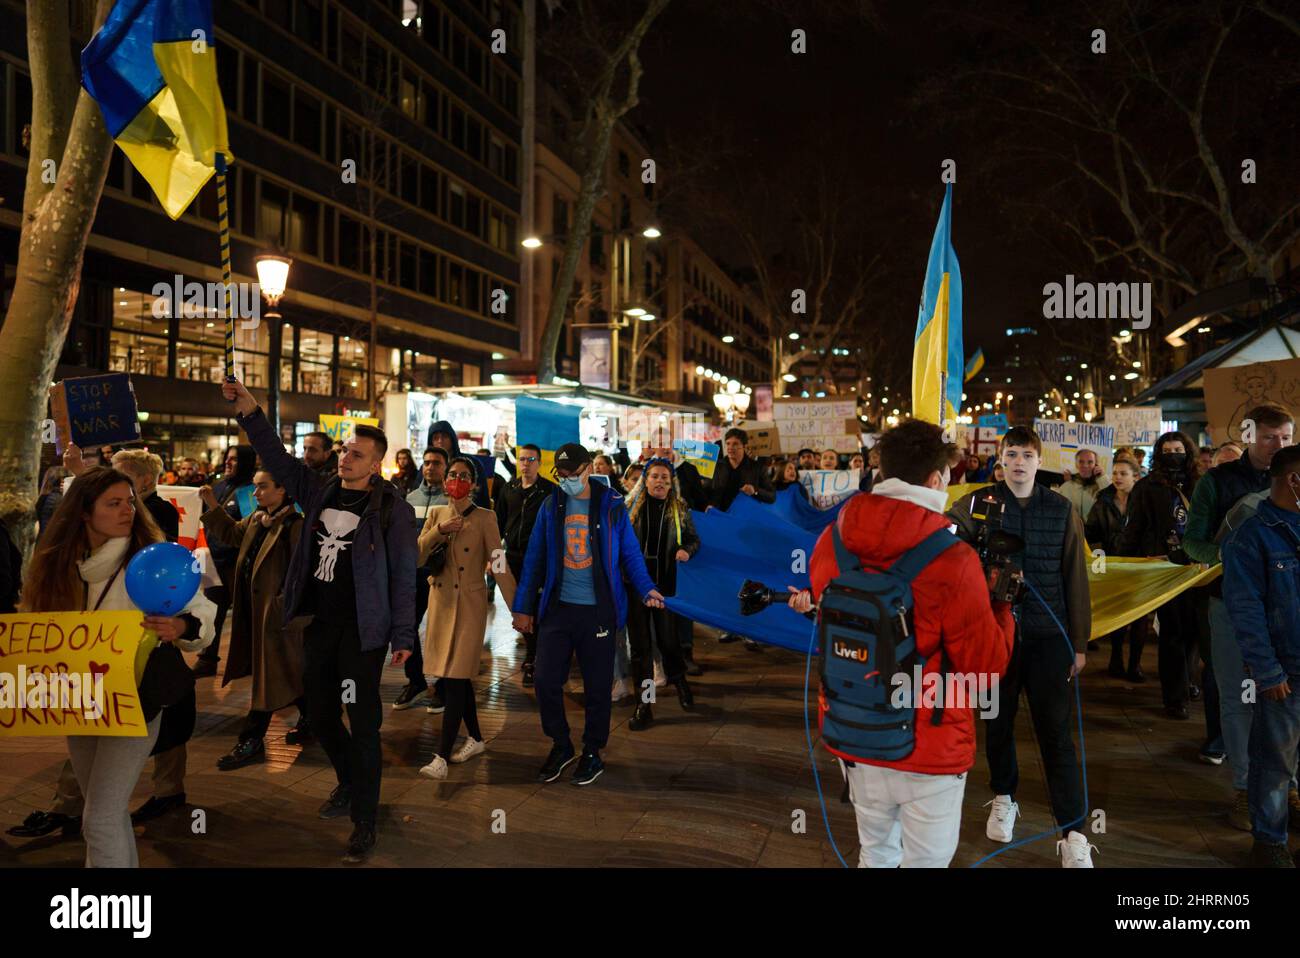 Barcelona, Spain - February 25, 2022: Walking Protest against the war and russian aggressive Vladimir Putin politic. Ukrainians in Spain in defense of Ukraine on plaza Catalunya place. Global military conflict, invasion. Reportage editorial photo from La Rambla Street Stock Photo